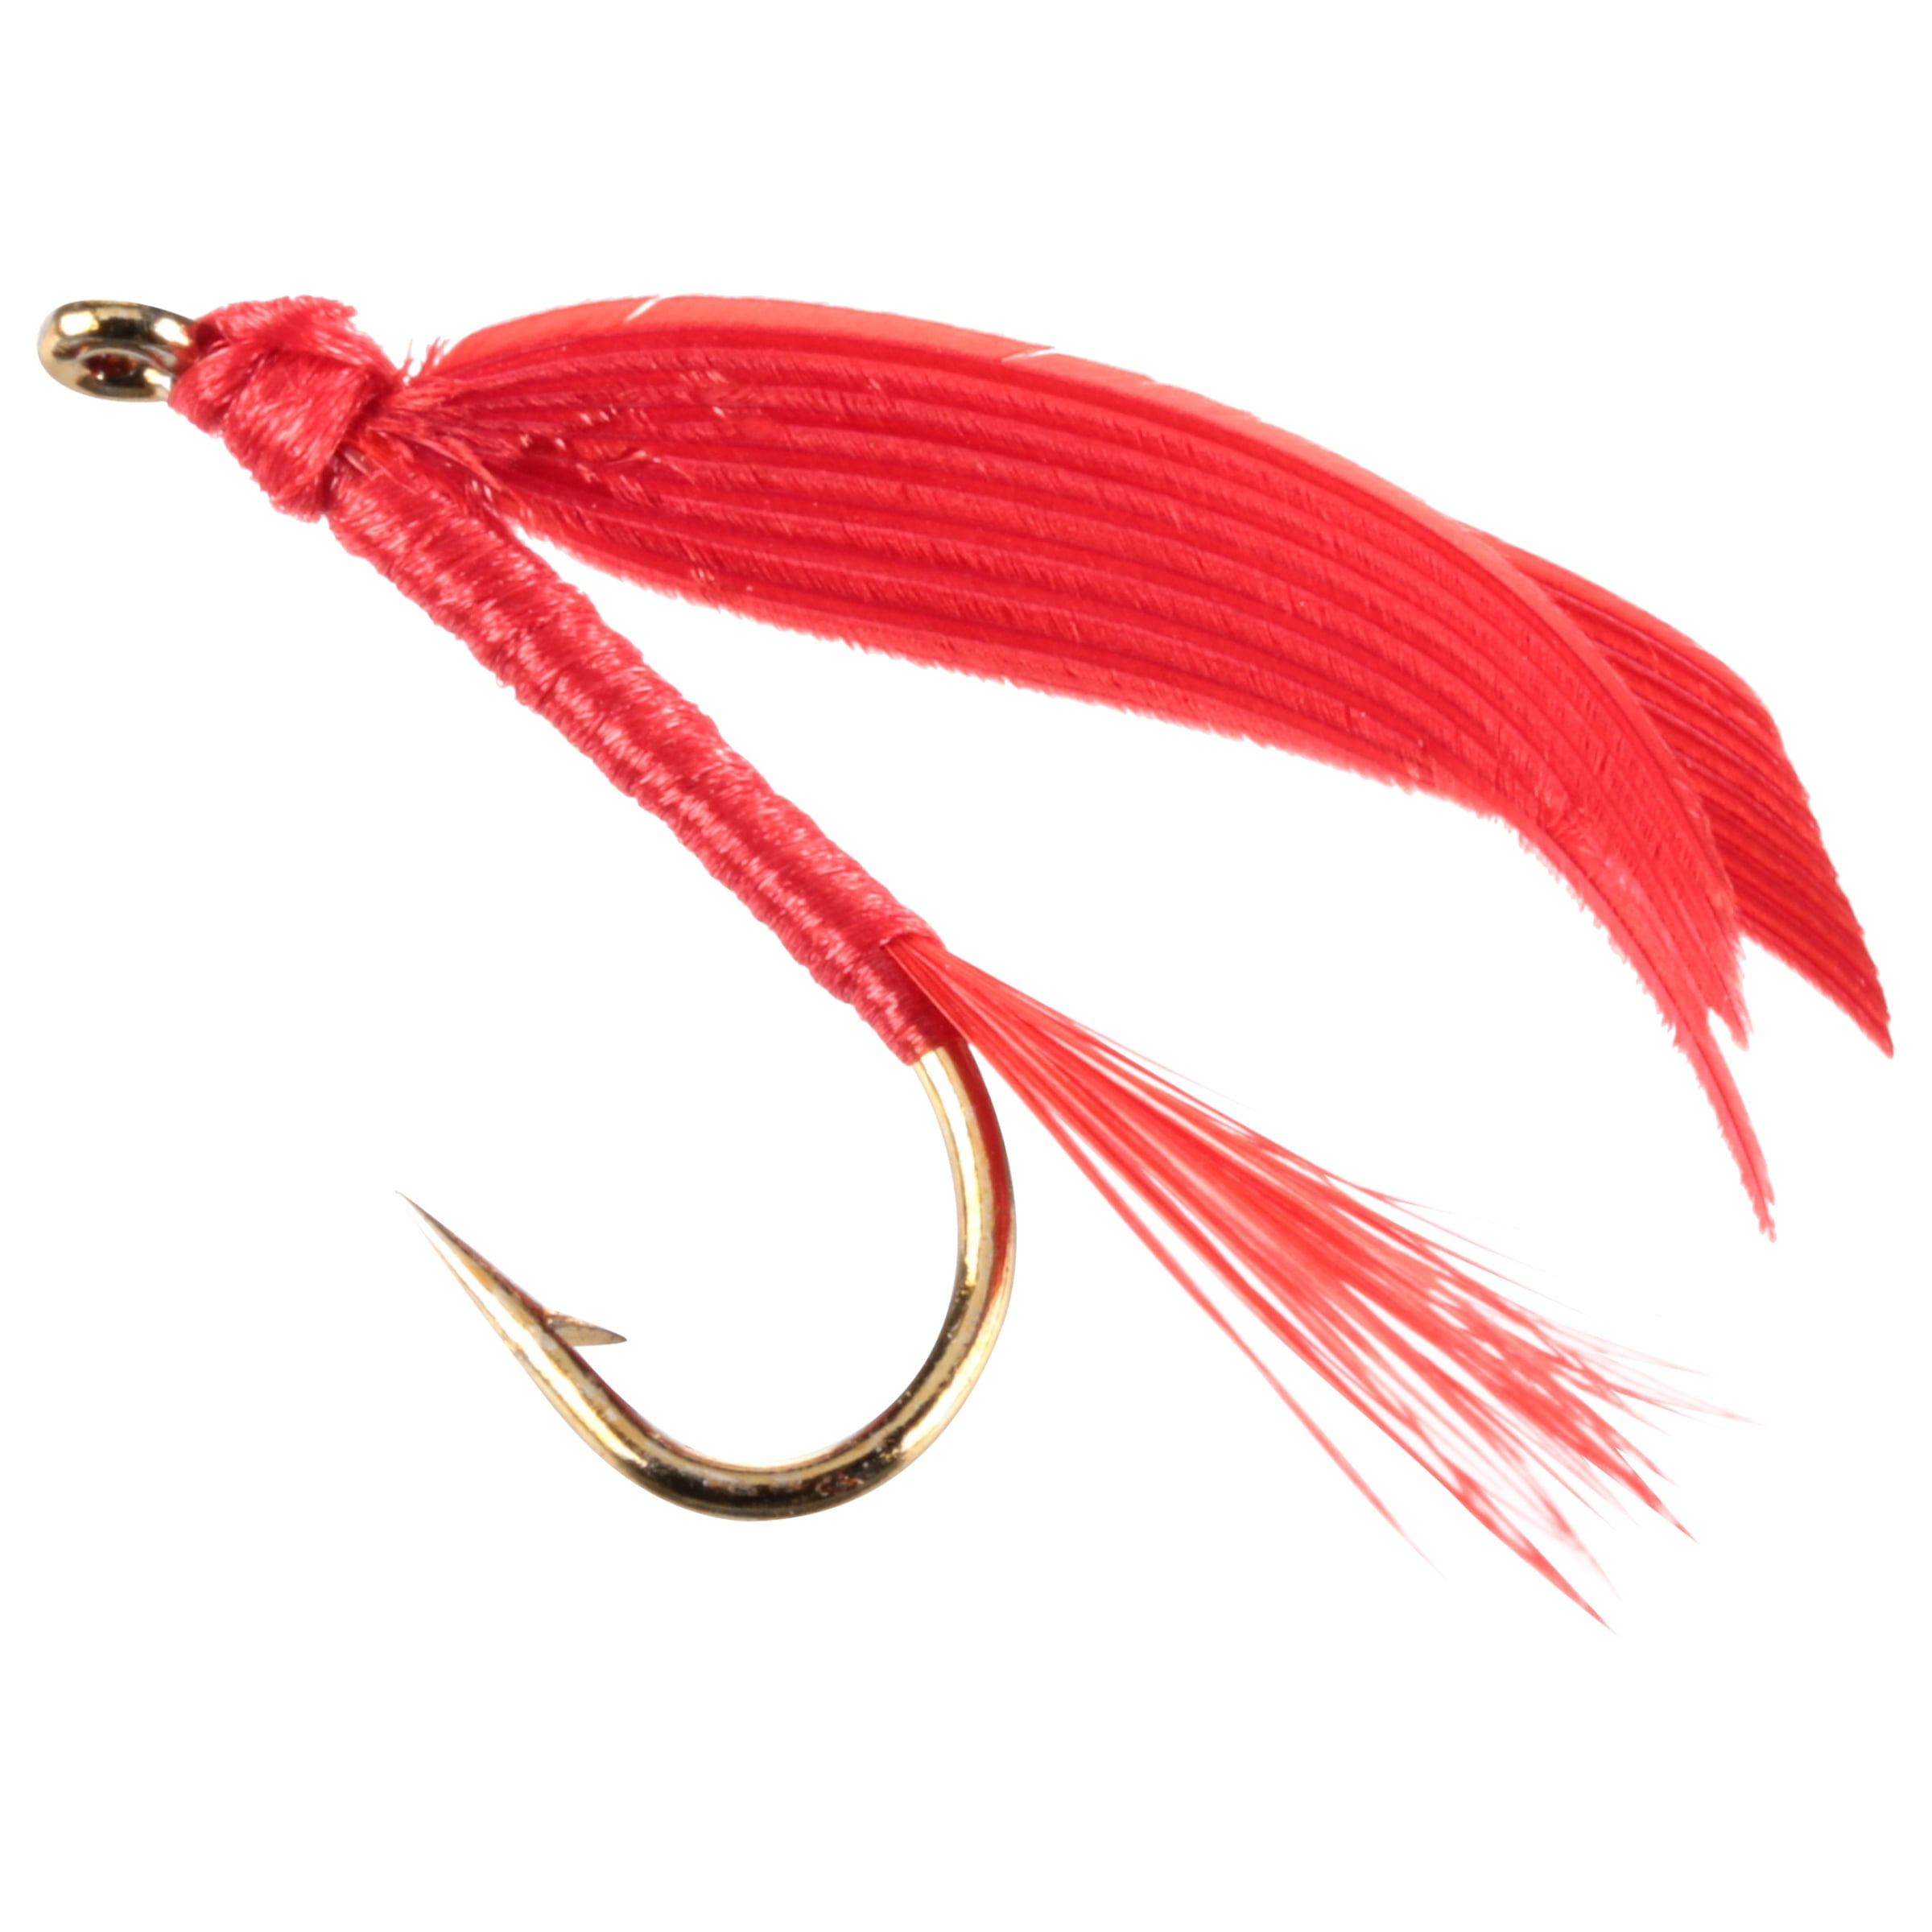 Cortland Silverstream Value Fly, Hook Size #12, Assorted, 664289 